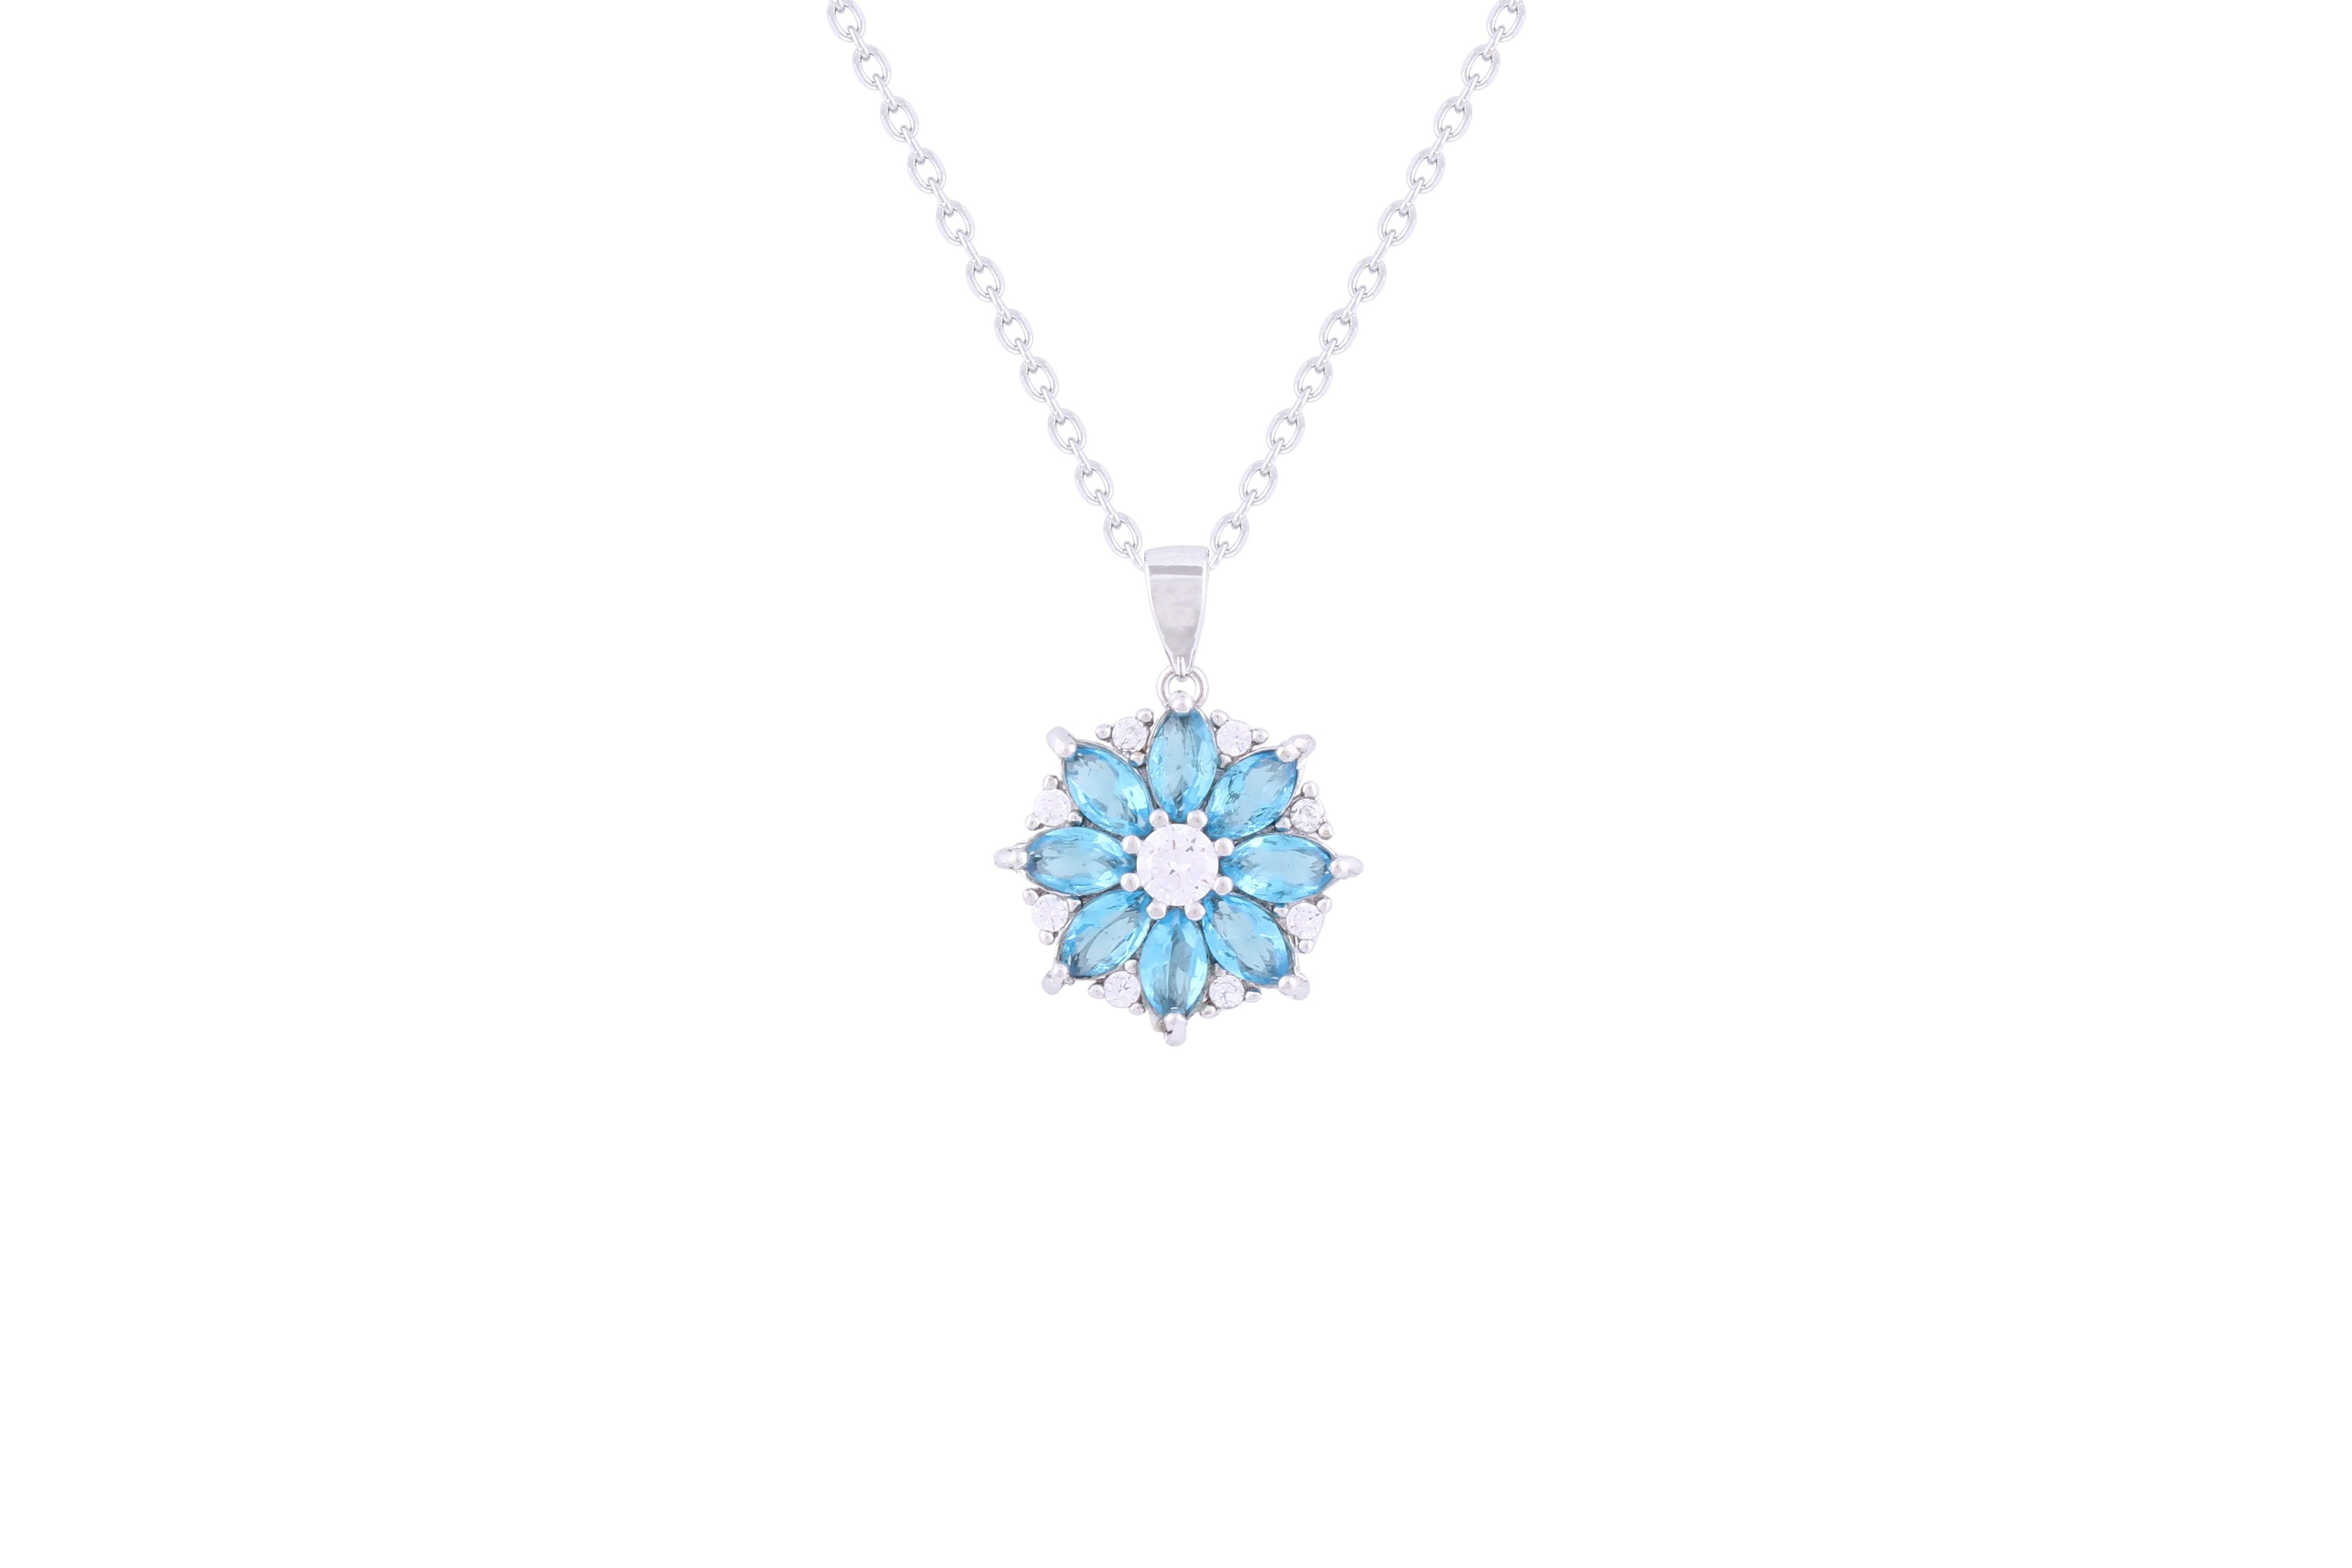 Asfour 925 Sterling Silver Aquamarine Flower Cluster Necklace NR0496-M